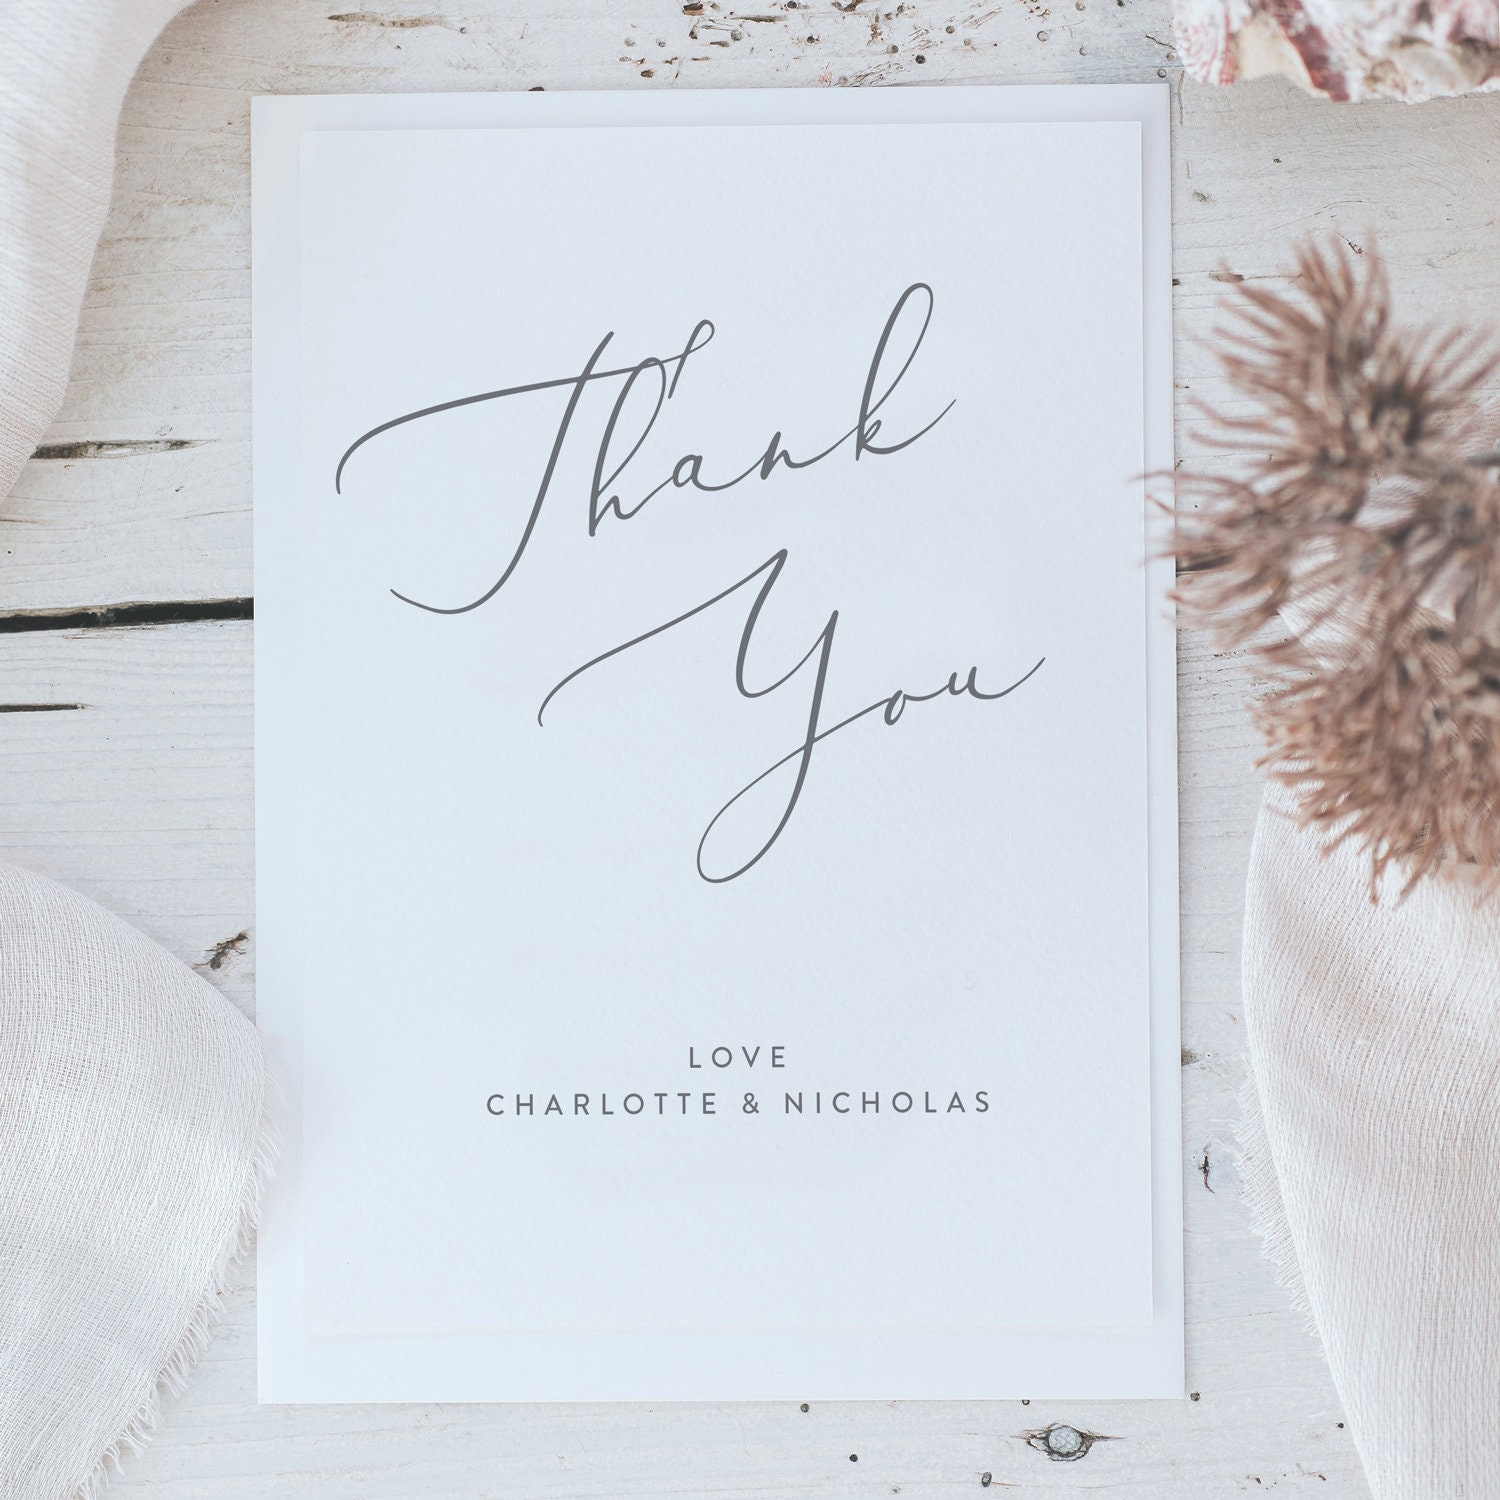 Simply Elegant Thank You Card With Romantic Calligraphy Font - Thank Cards Envelopes Printed Personalised Greeting